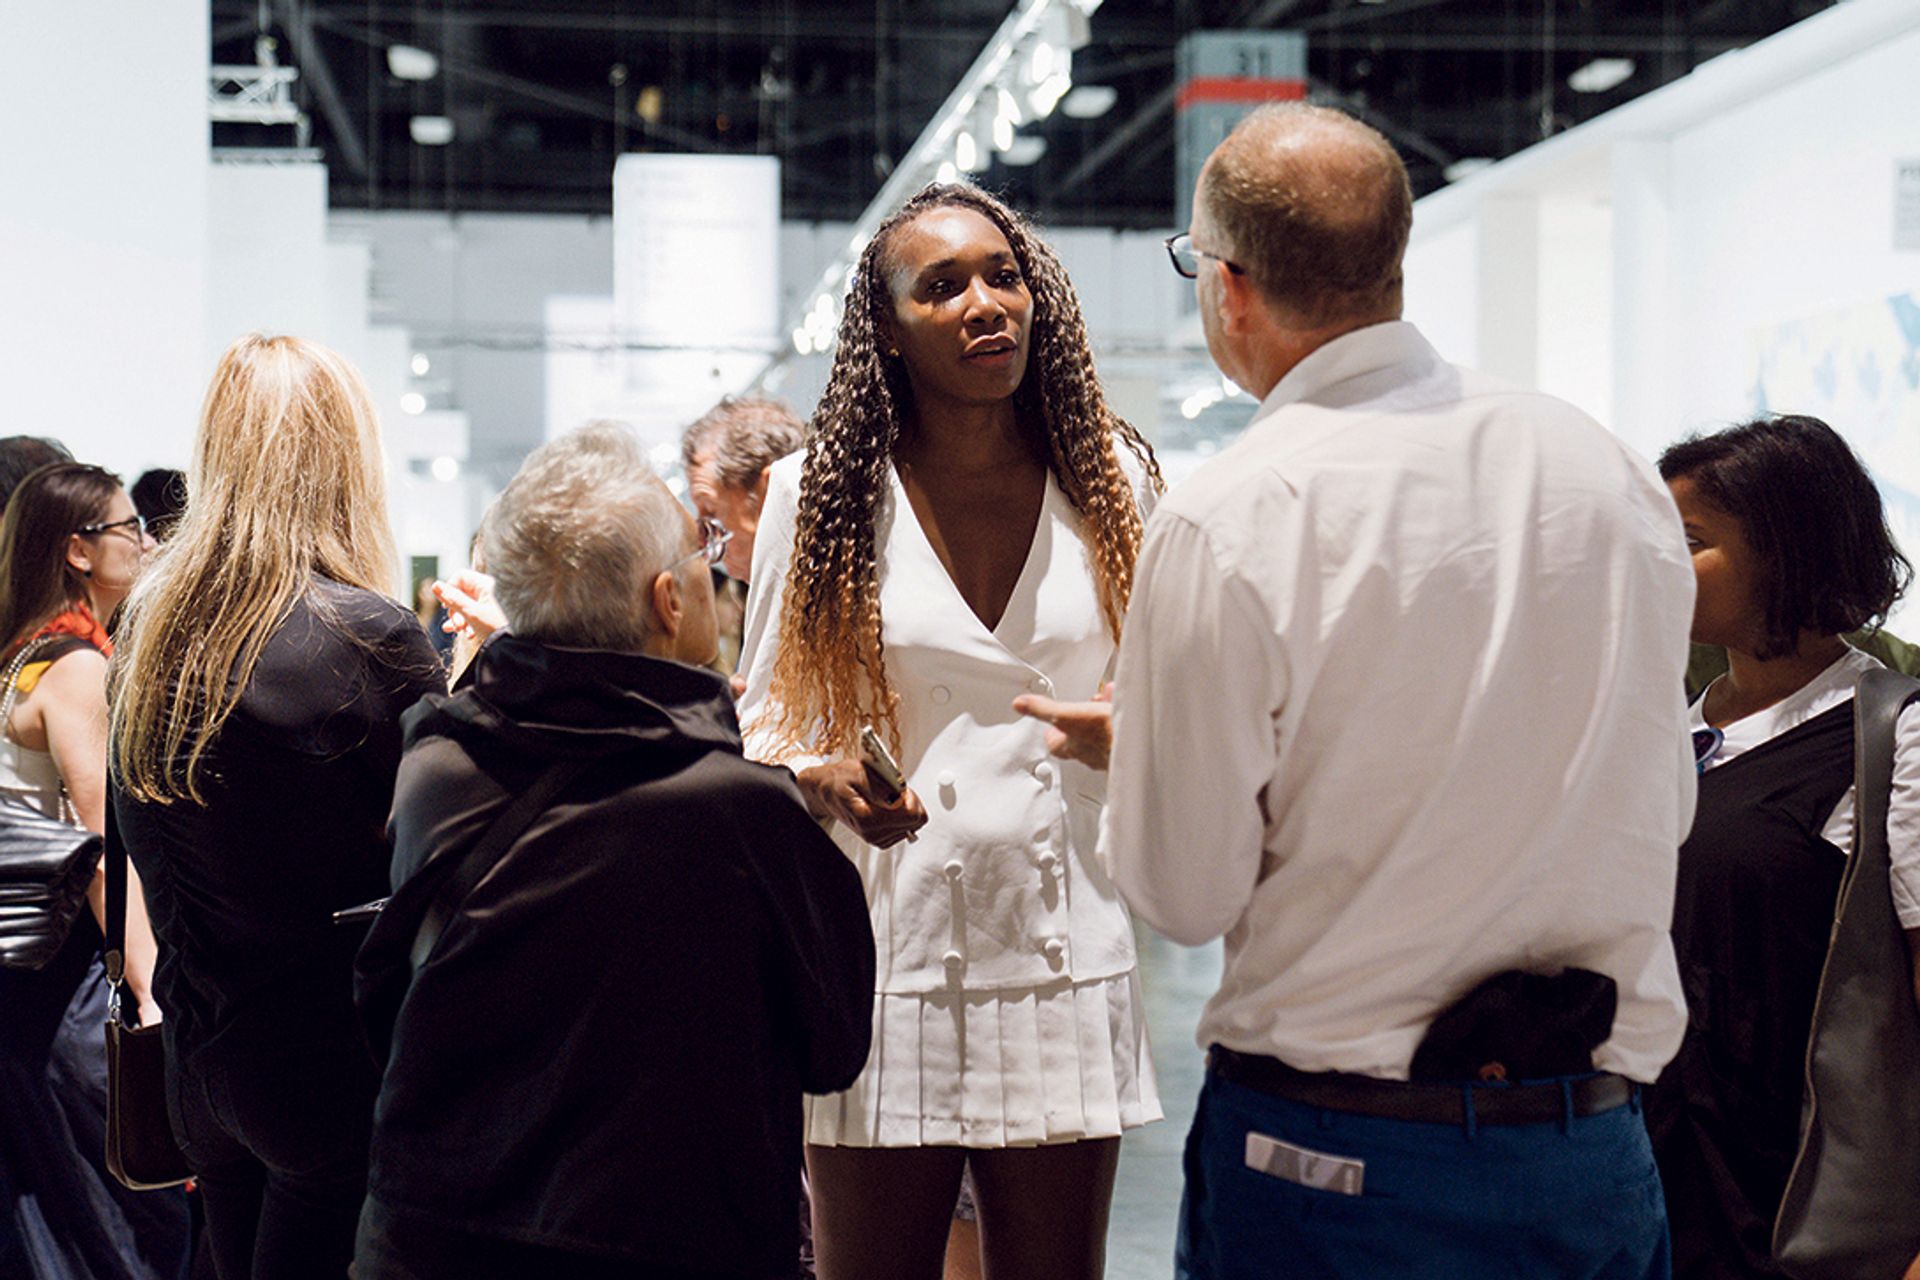 On the ball: Champion tennis player Venus Williams is said to be learning about how to build an art collection Photo: Eric Thayer